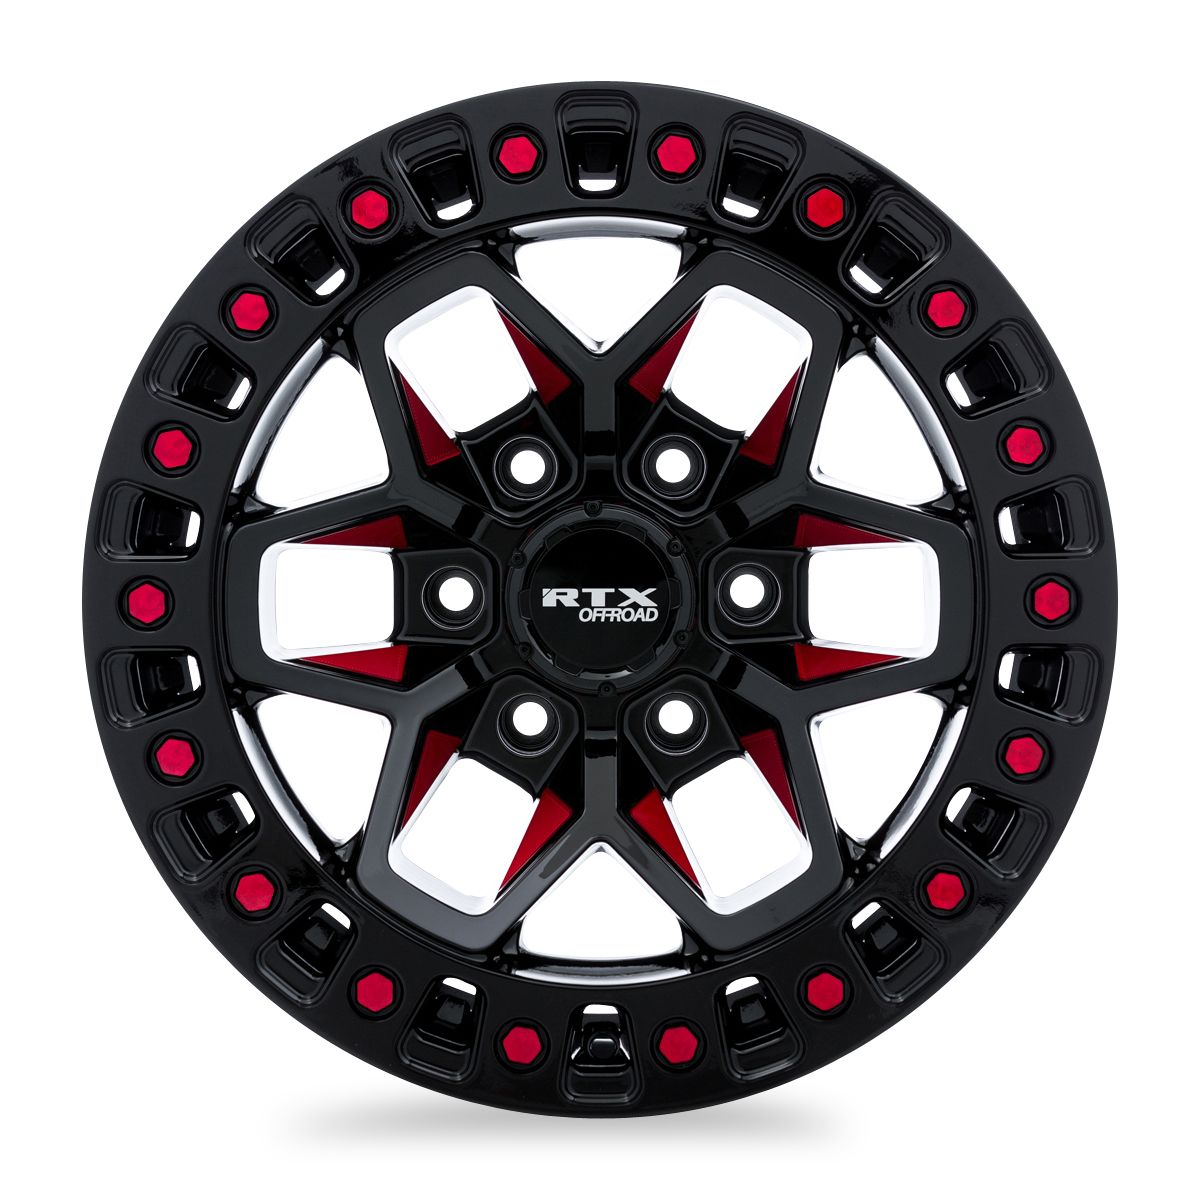 RTX® (Offroad) • 082931 • Zion • Black Milled Red • 18x9 5x127 ET-15 CB71.5